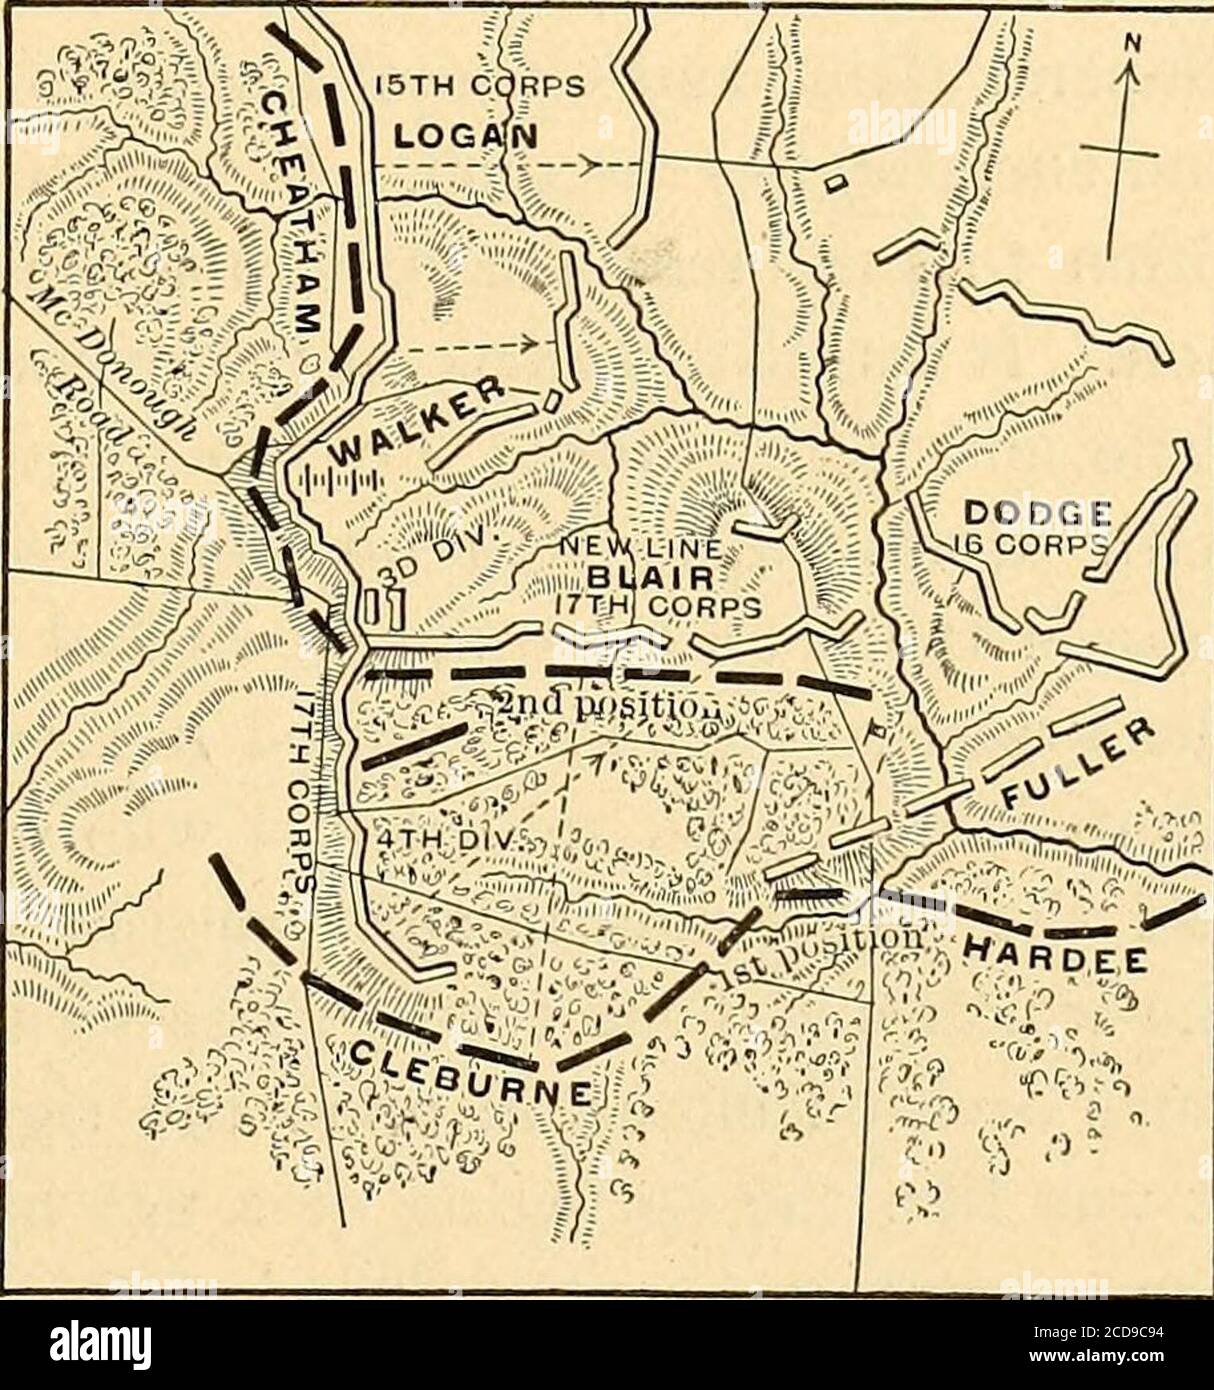 . Redeeming the republic : the third period of the war of the rebellion, in the year 1864 . esborough to strike Har-dees right flank. The Confed-erates had thrown up a long lineof intrenchments, beginning eastof the railroad, running west,crossing k, then turning southon the west side of the village,and again crossing the railroadbelow the Baptist church, thusenclosing three sides of a quad-rangle. General Logan was westof the village, General Ransom south-west, while General Davis, with the Fourteenth Corps, was north-west, and General Stanley, with the Fourth Corps, was on his way downthe ra Stock Photo